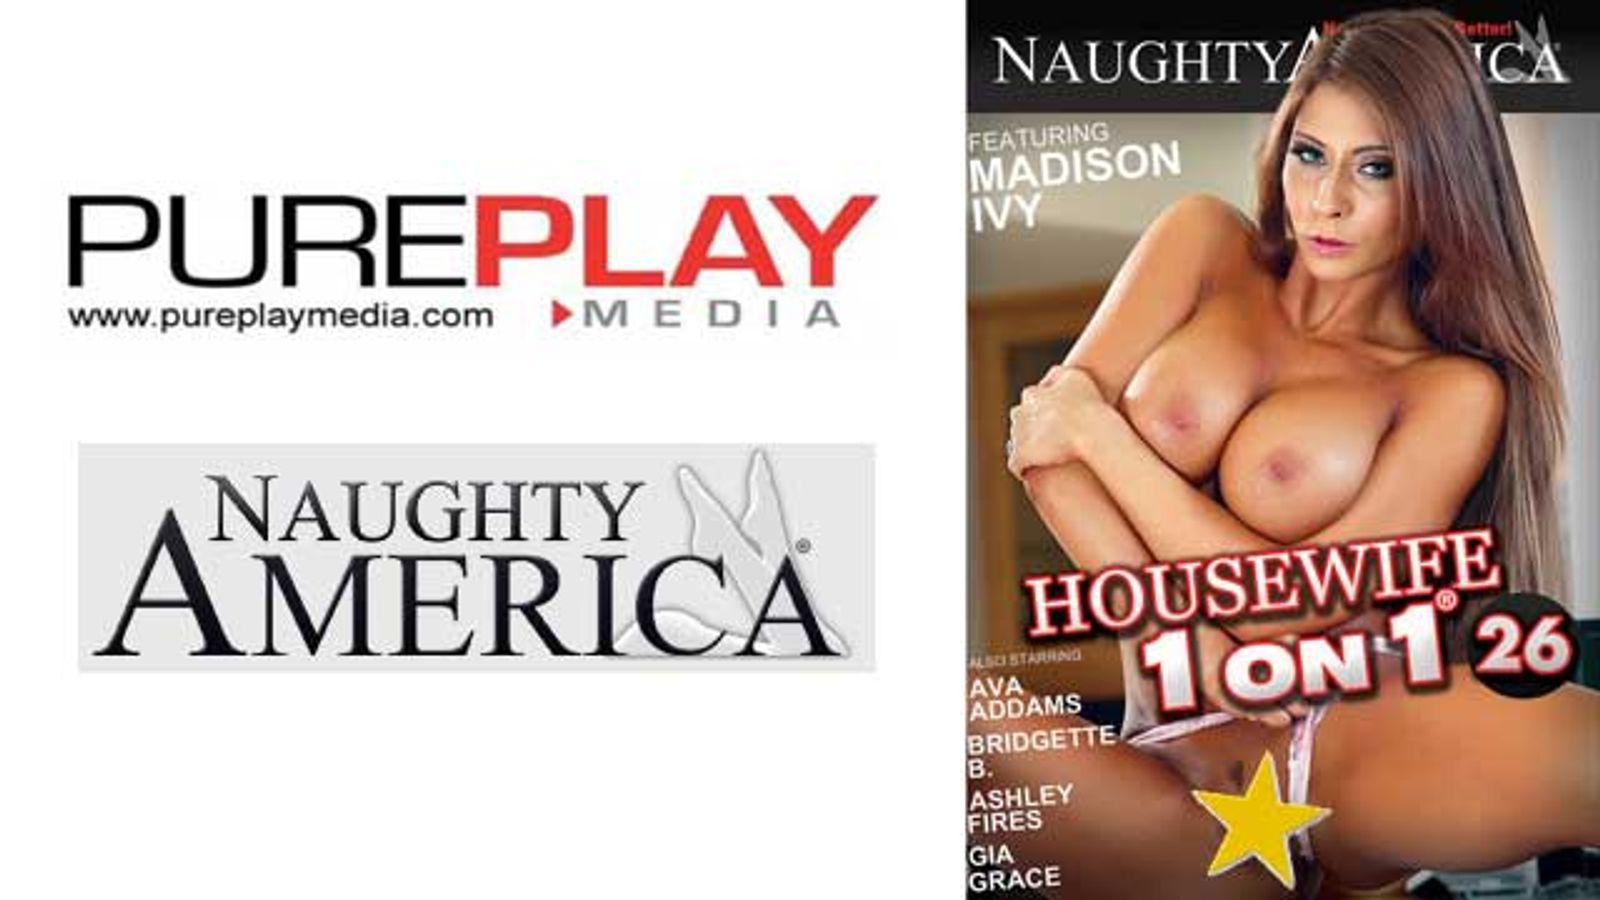 Pure Play, Naughty America Release 'Housewife 1 On 1 26'